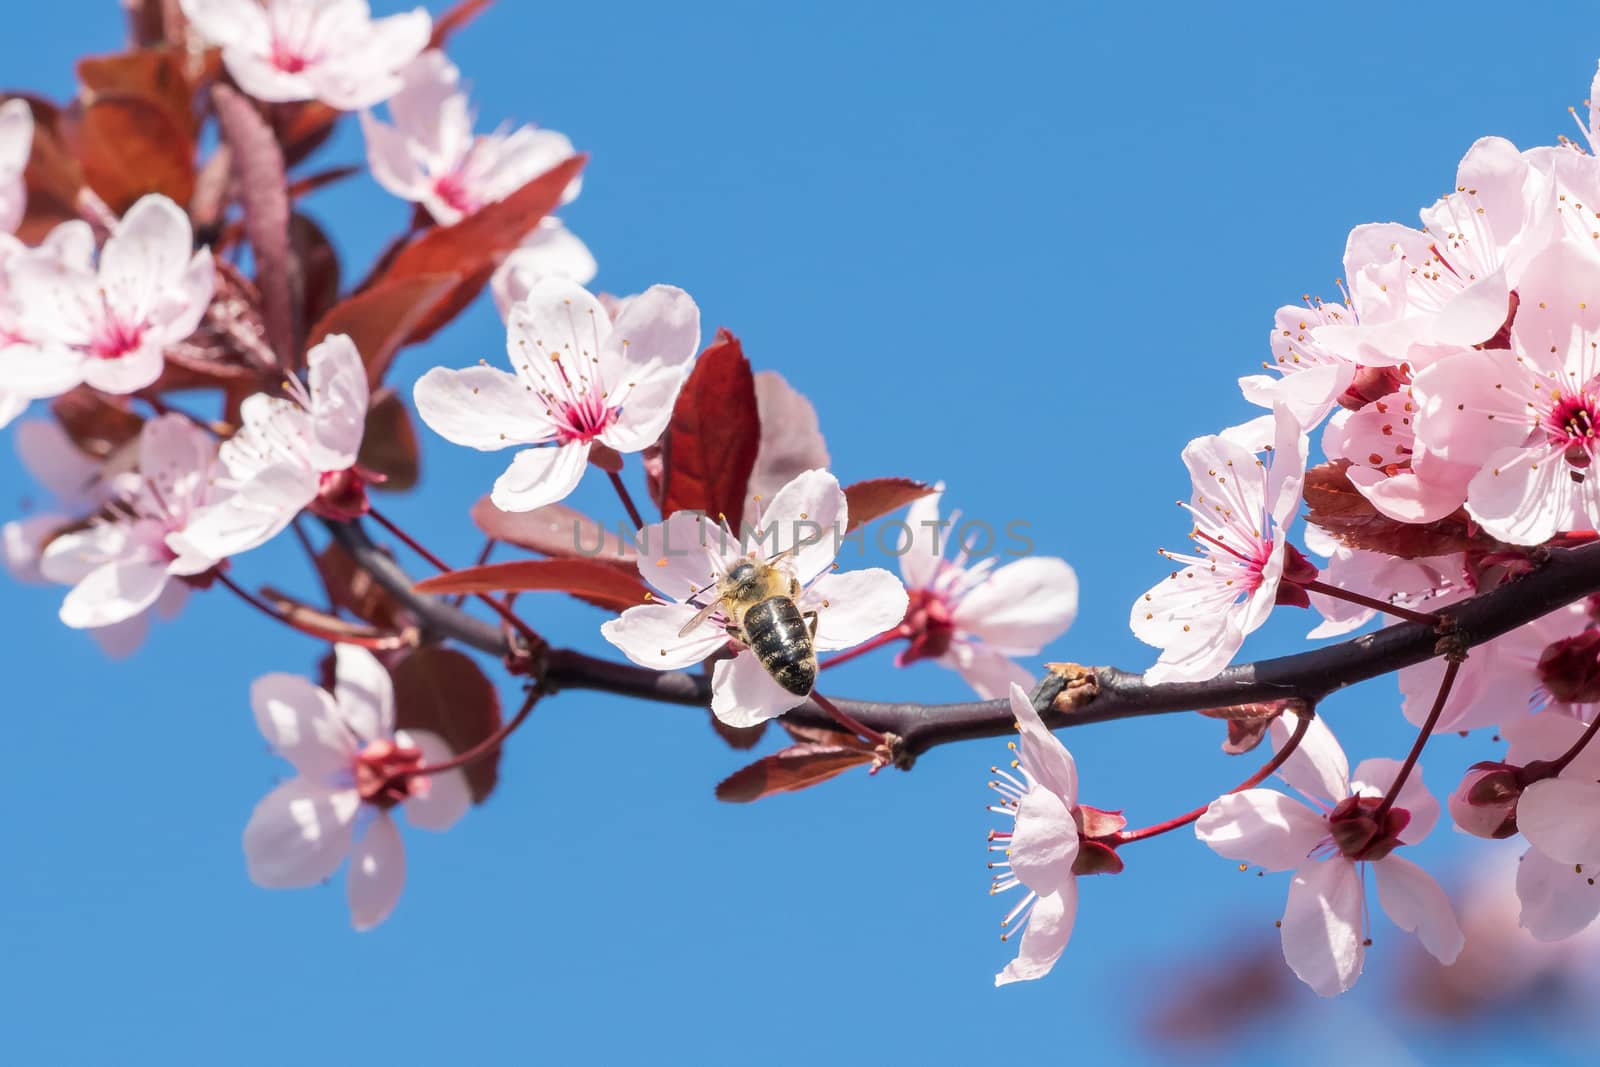 Bee on a pink cherry blossoms. Spring floral background on a blue sky. Cherry flowers blossoming in the springtime.